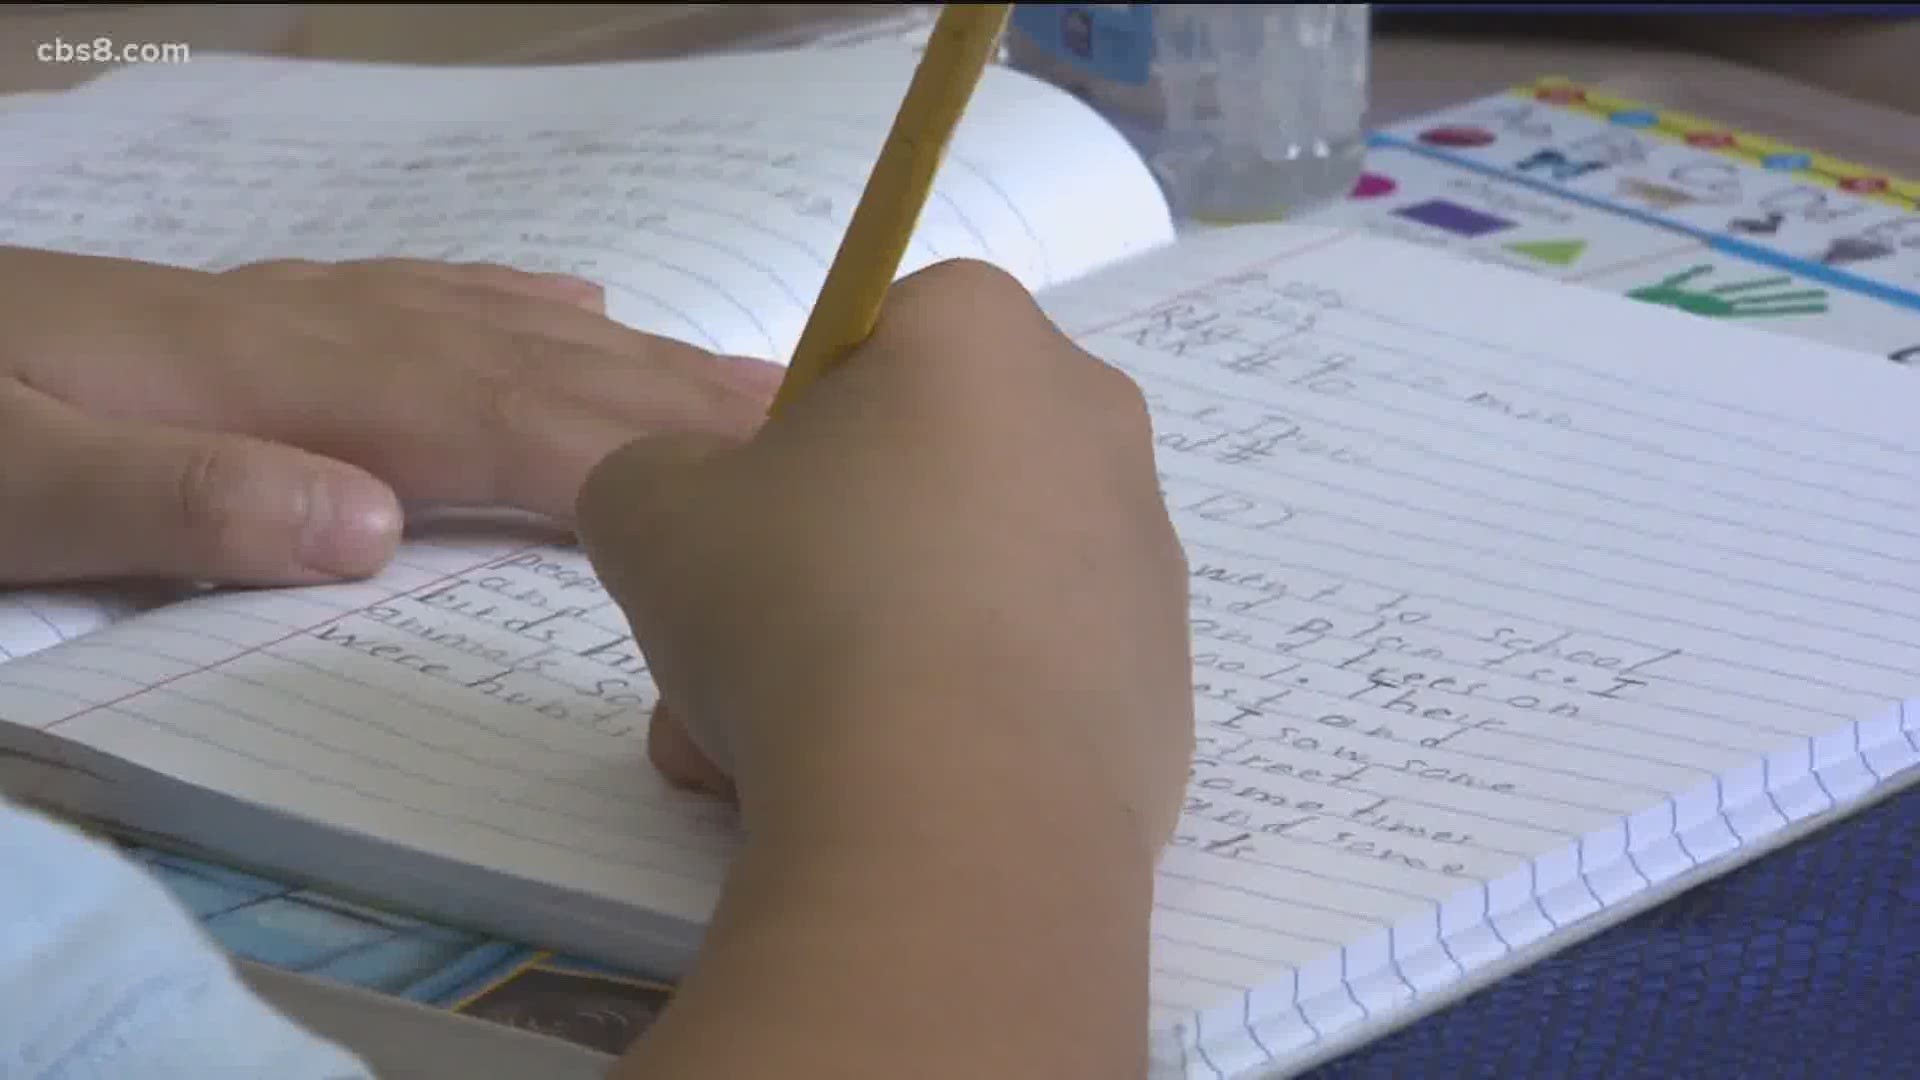 Some San Diego schools plan to resume instruction next month, and parents are being asked to decide their children’s back to school plan.